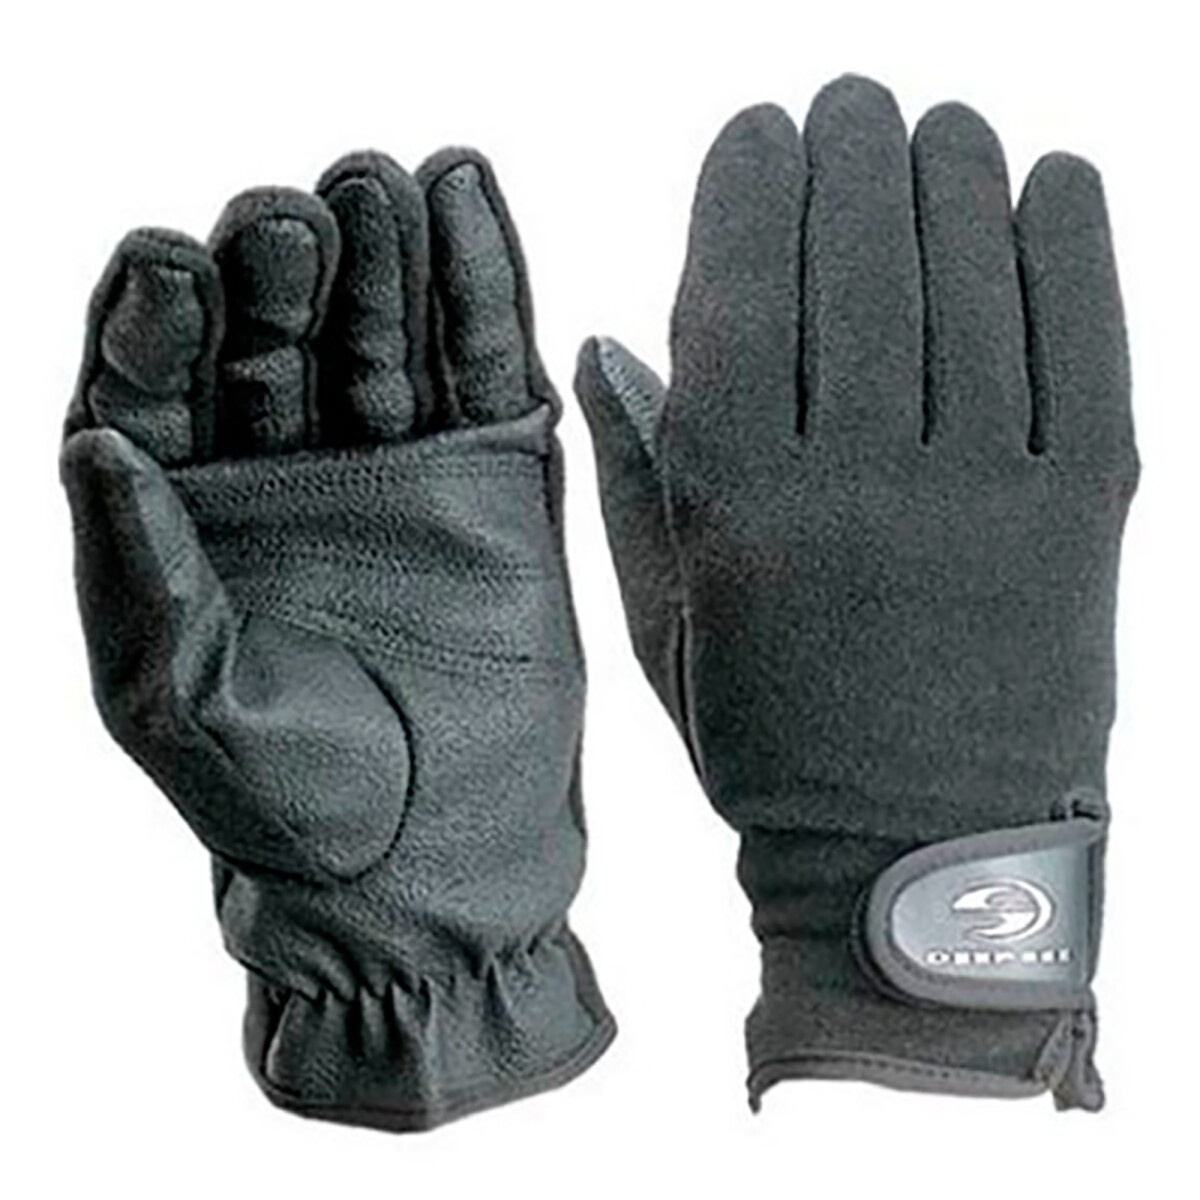 Deep See - Guantes Diving D321012 - S. - 001 